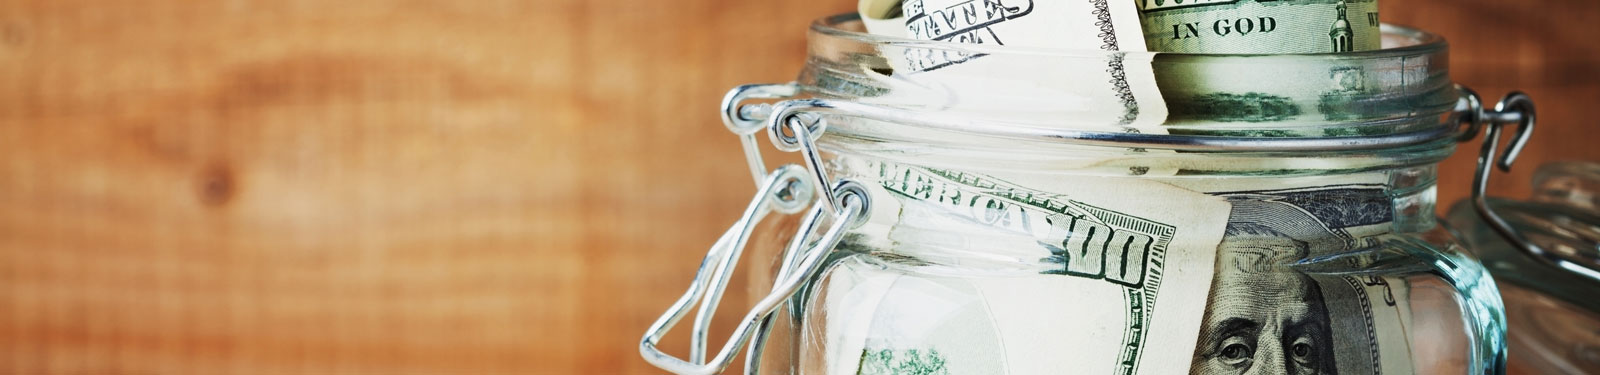 Jar of money as an emergency fund so that you have savings set aside for unexpected expenses.